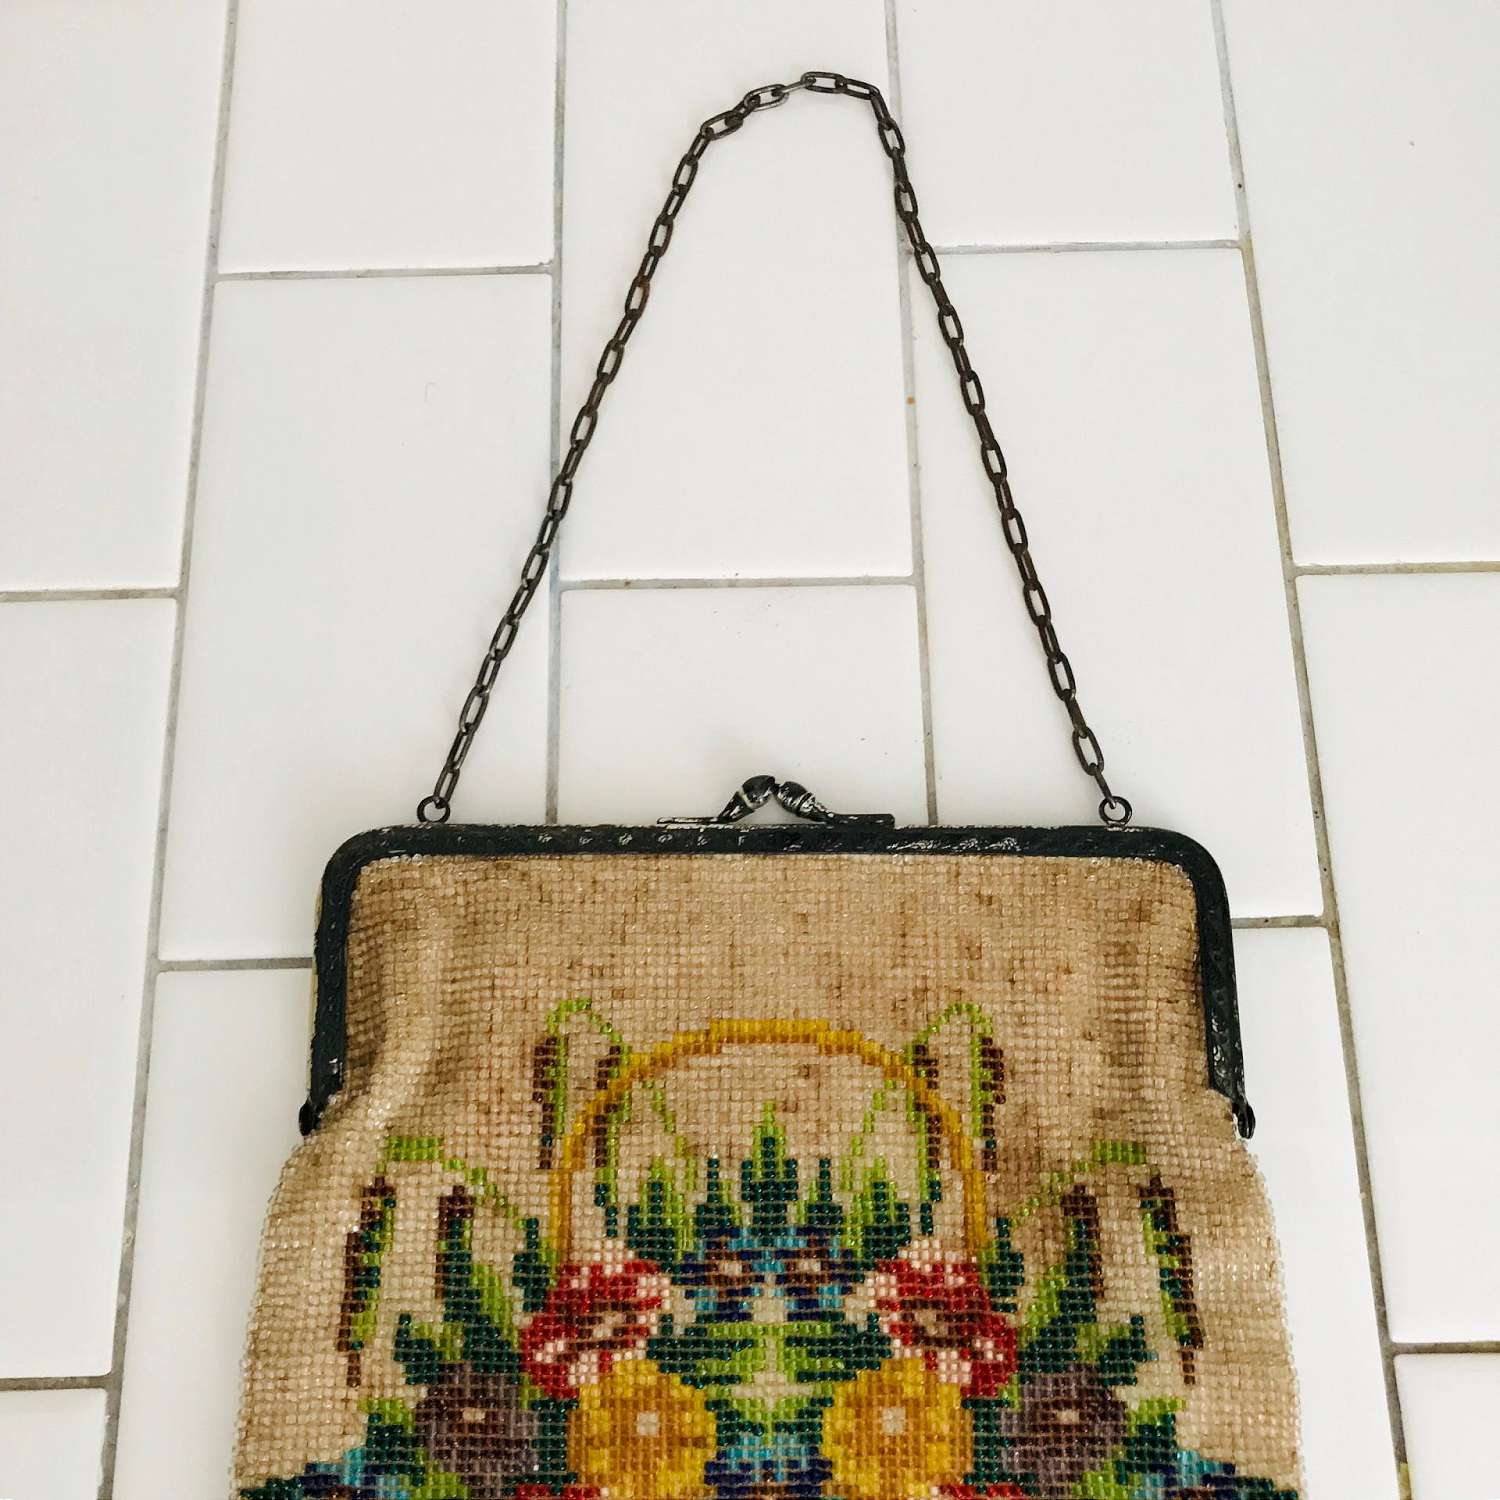 Vintage French Floral Beaded Purse